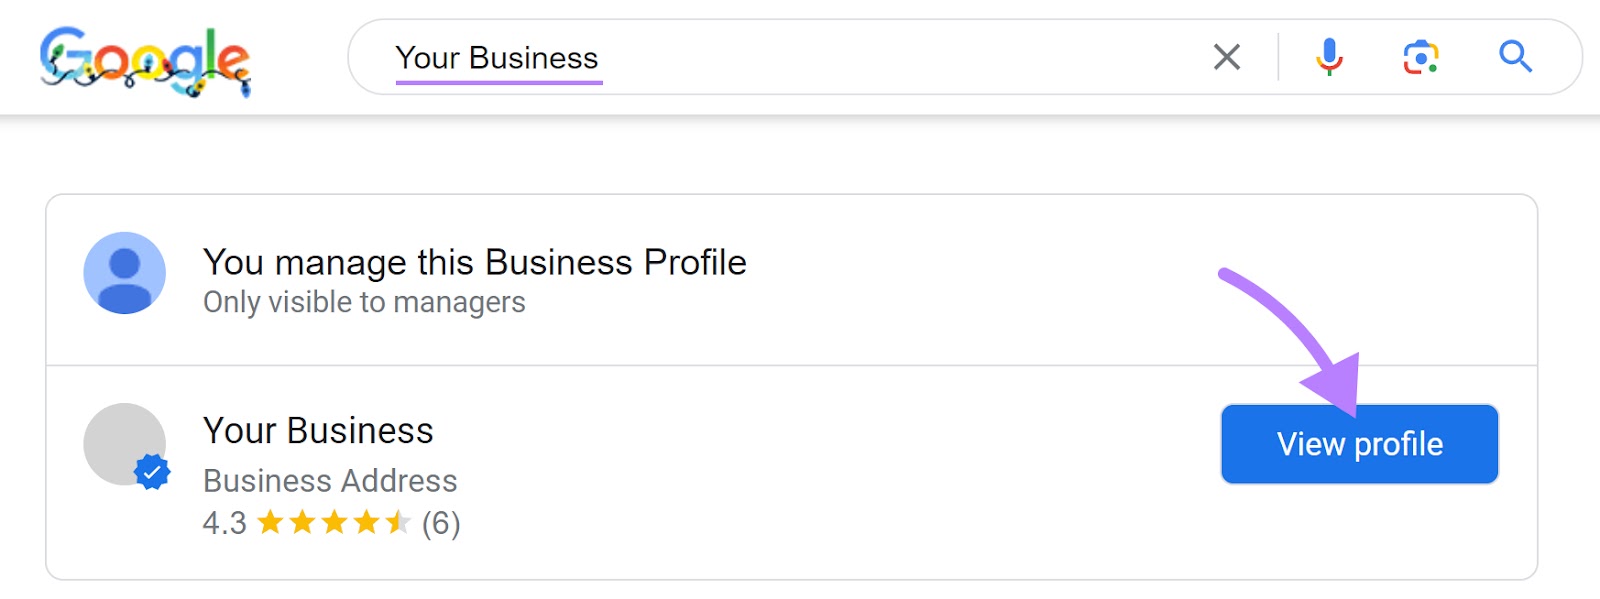 View Google My Business profile